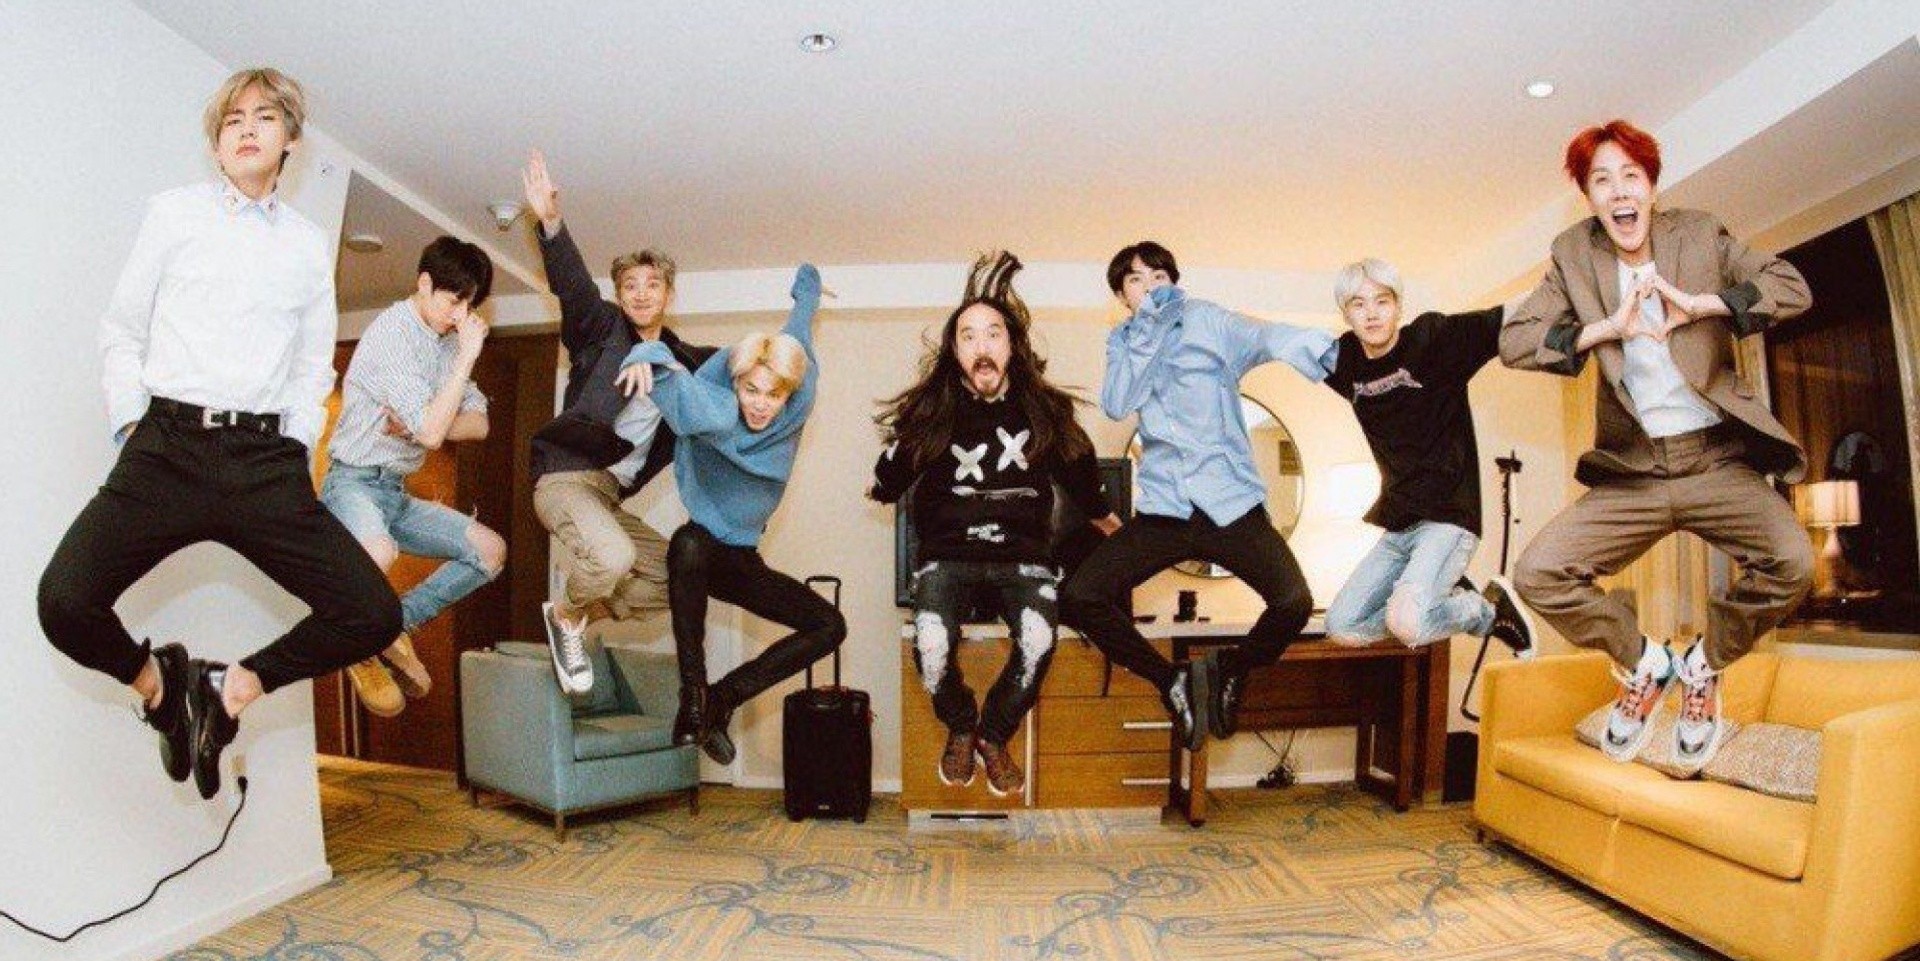 Steve Aoki releases new track 'Waste It On Me' with BTS, sung entirely in English – listen